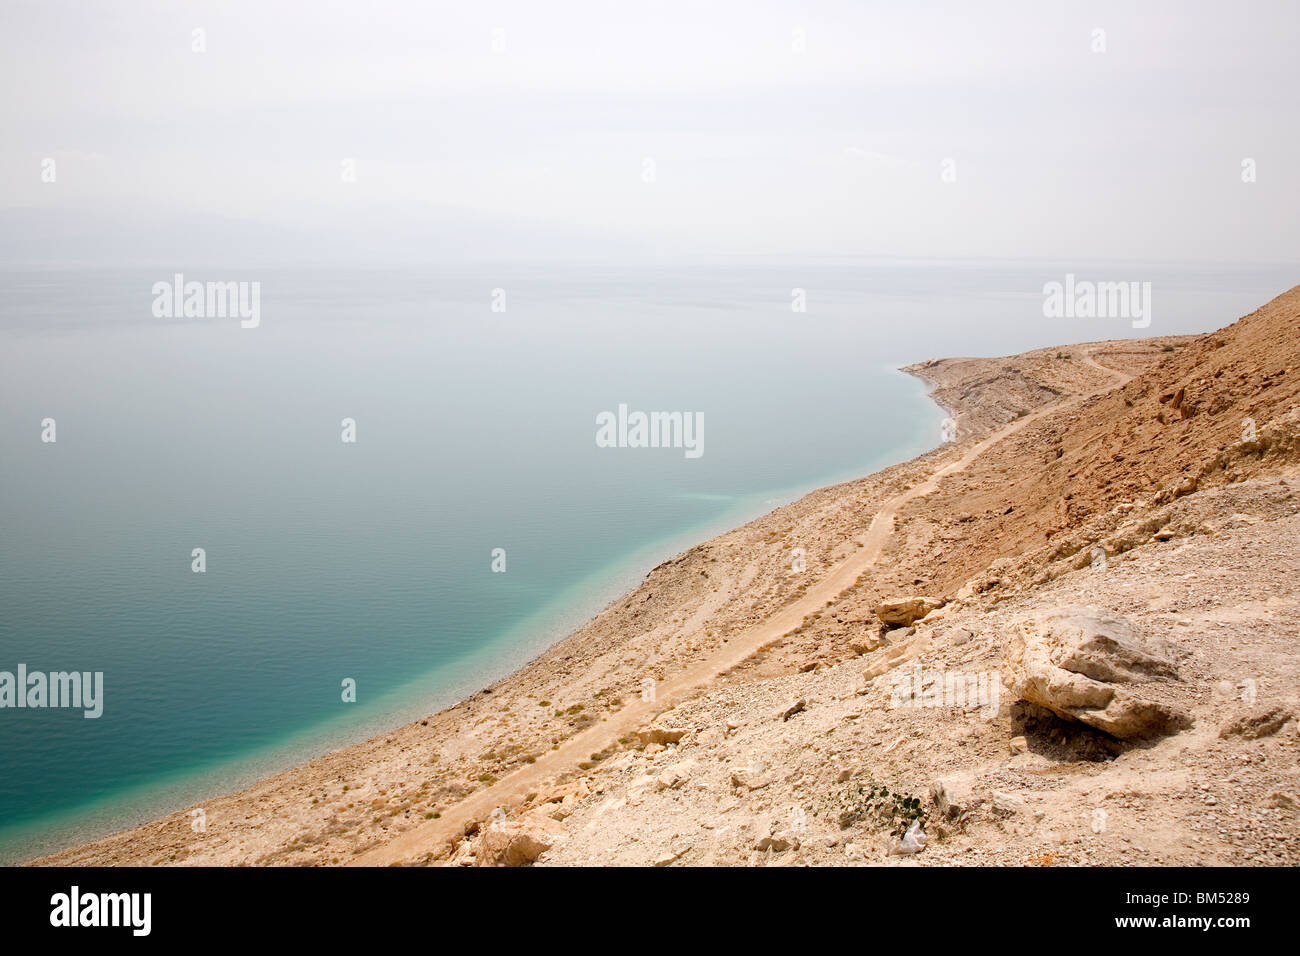 View of Dead sea body of water - Israel Stock Photo